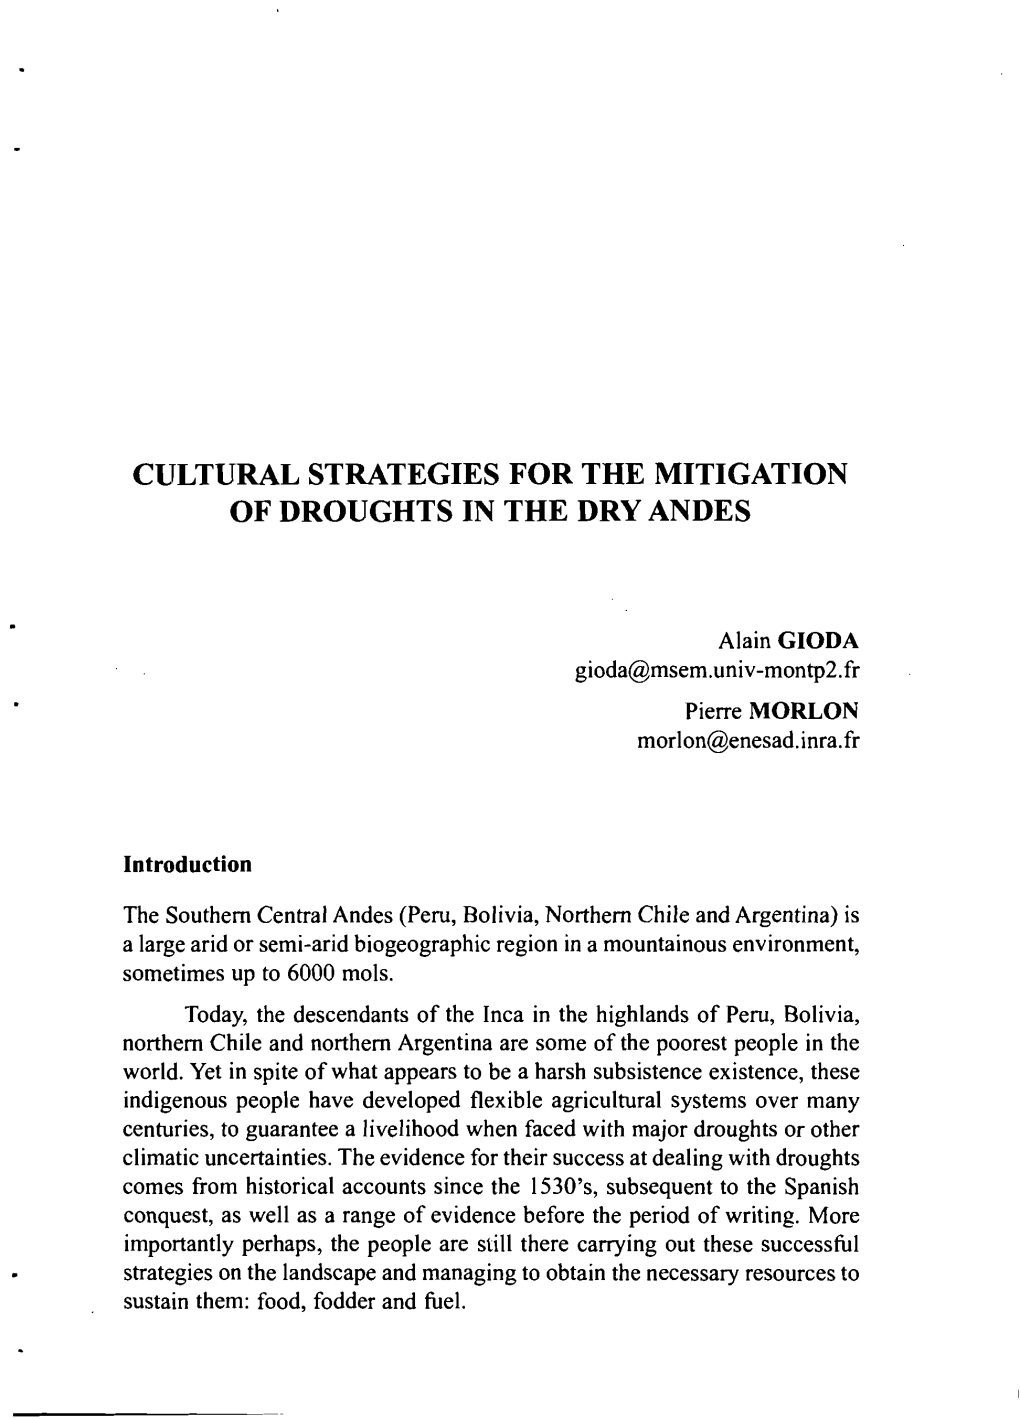 Cultural Strategies for the Mitigation of Droughts in the Dry Andes